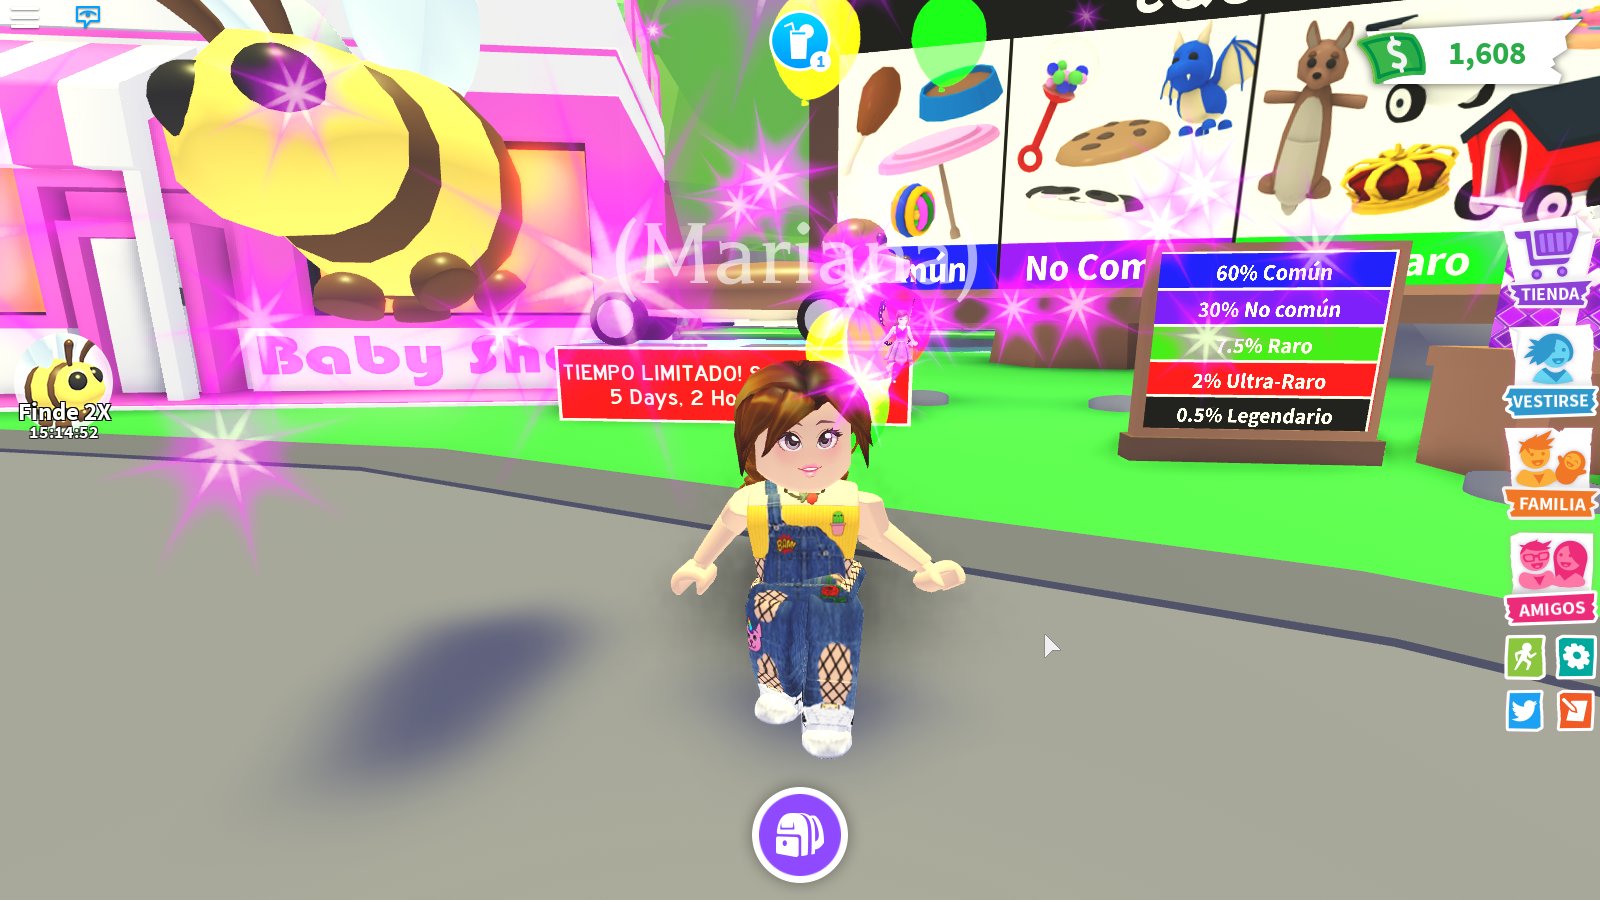 Mariana* Fan de Zuly on X: Adopt me please put the faces of dressing in  the roblox catalog I want it in my avatar. I hope that in the next gift  update